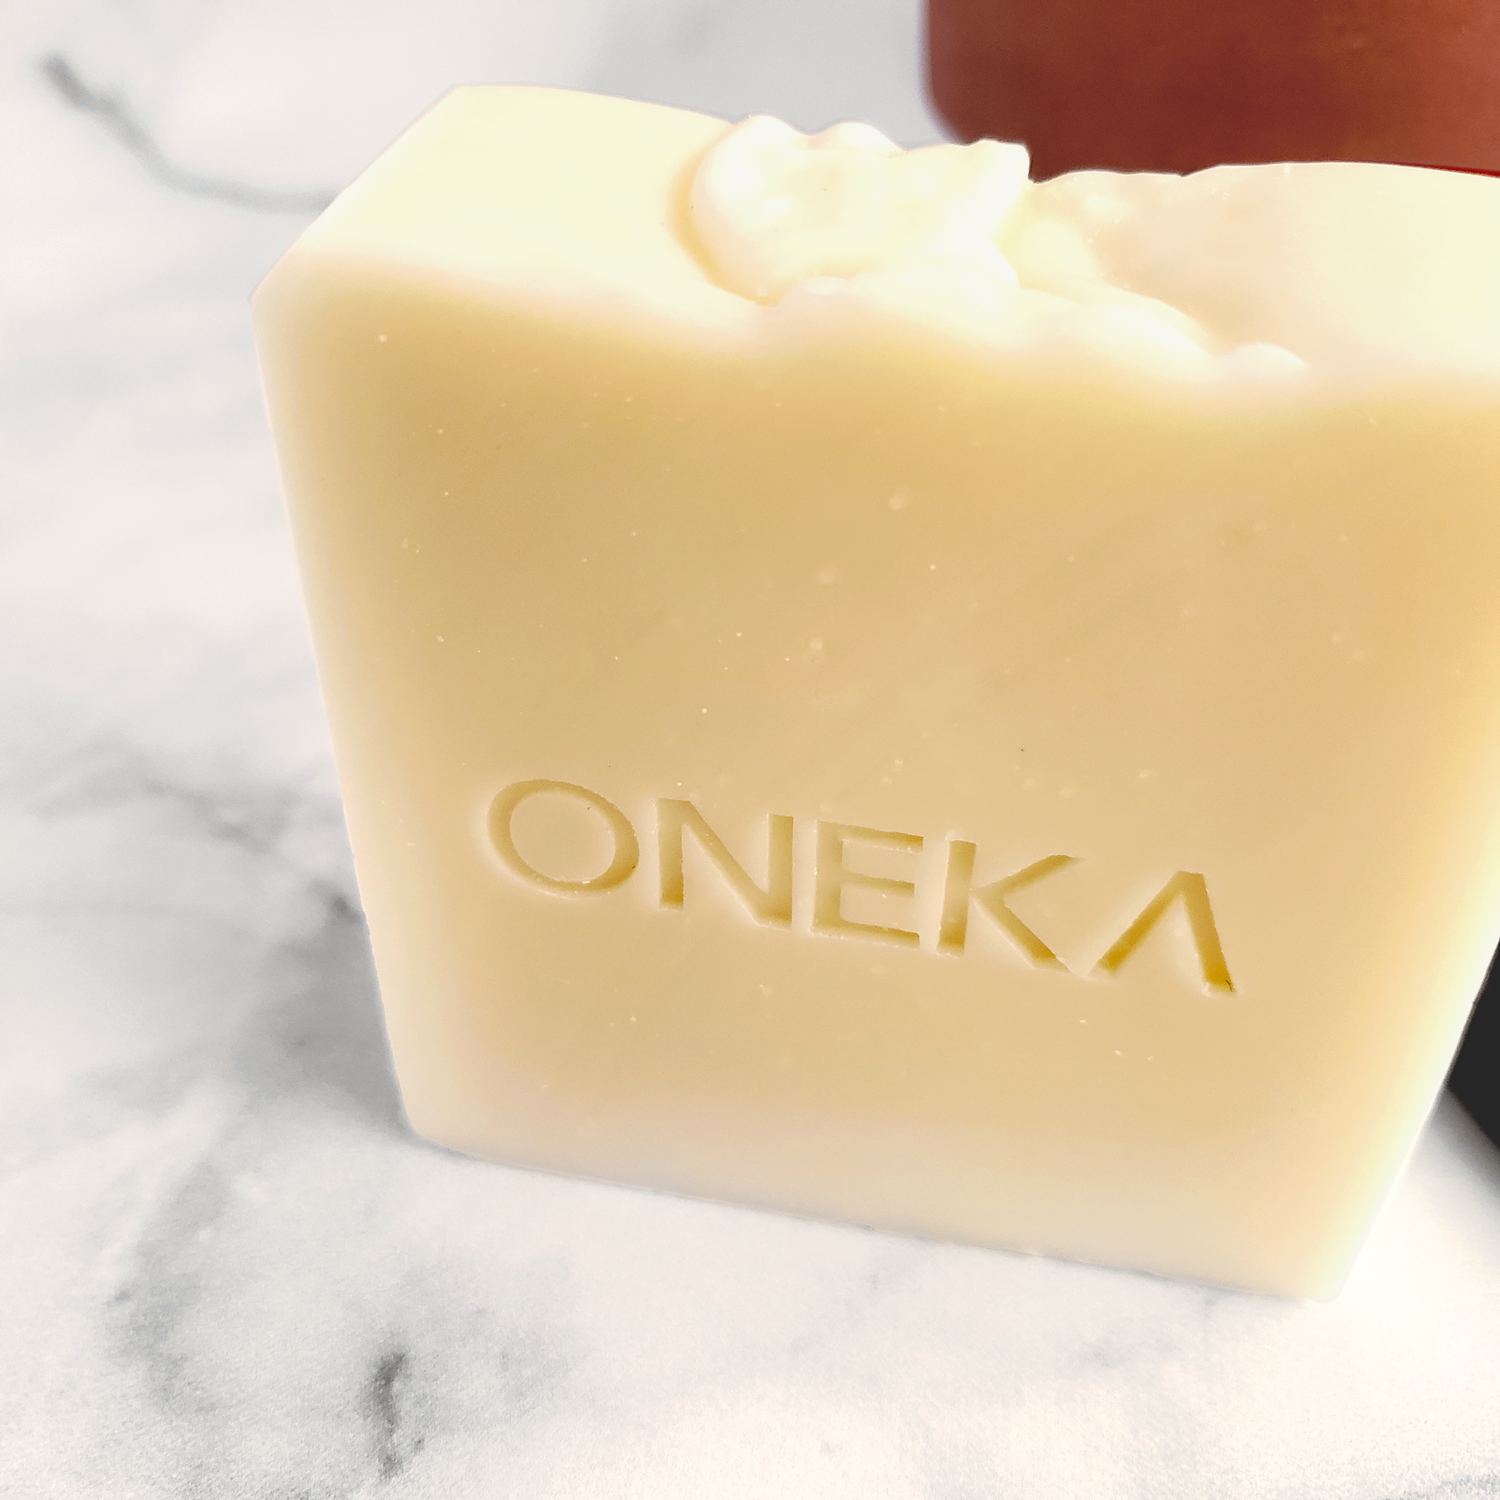 Oneka Unscented Soap Bar Close Up